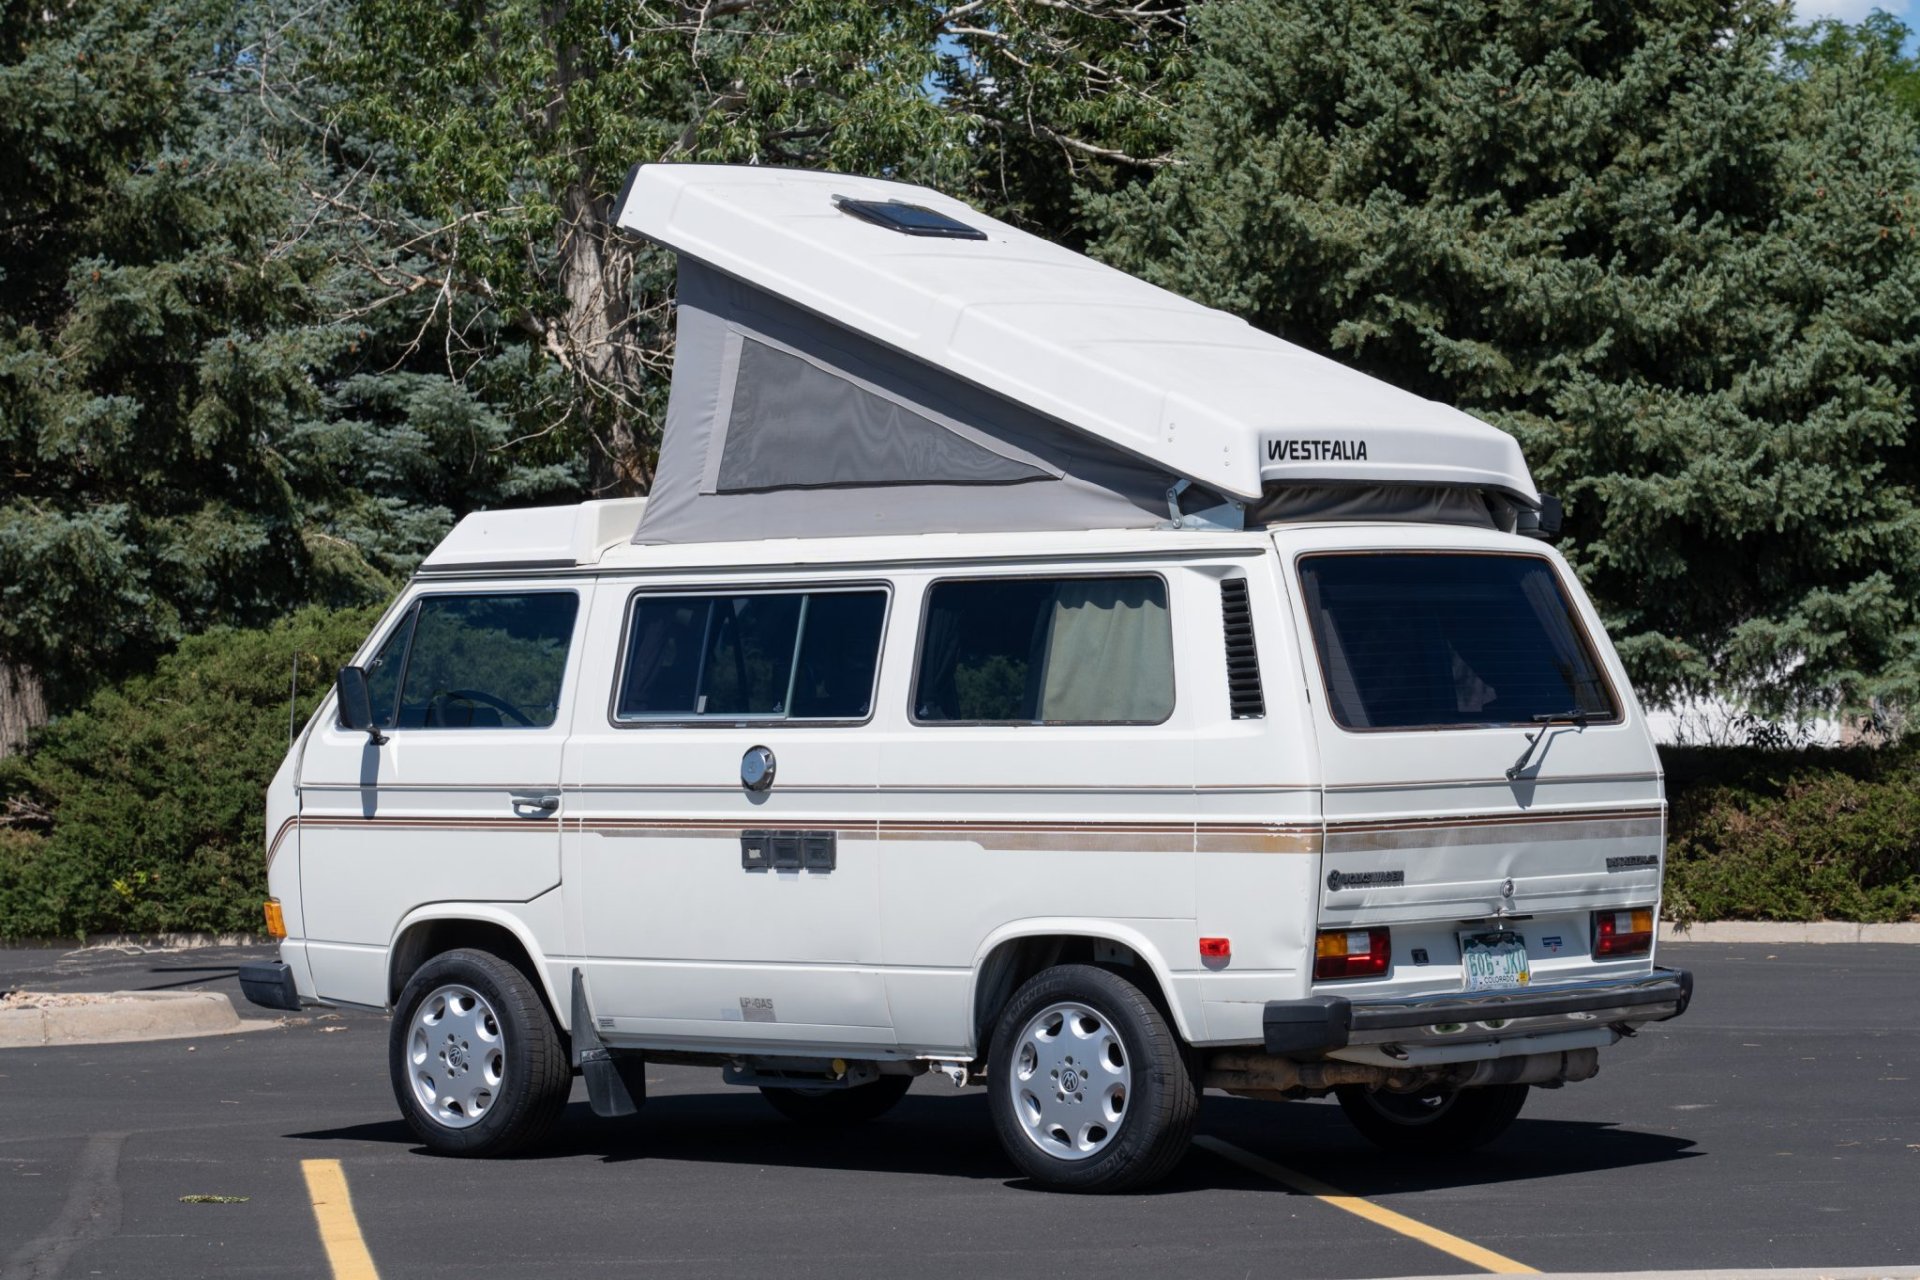 https://s1.cdn.autoevolution.com/images/news/gallery/24-years-owned-volkswagen-vanagon-westfalia-hides-a-pleasant-surprise-in-the-engine-bay_10.jpg